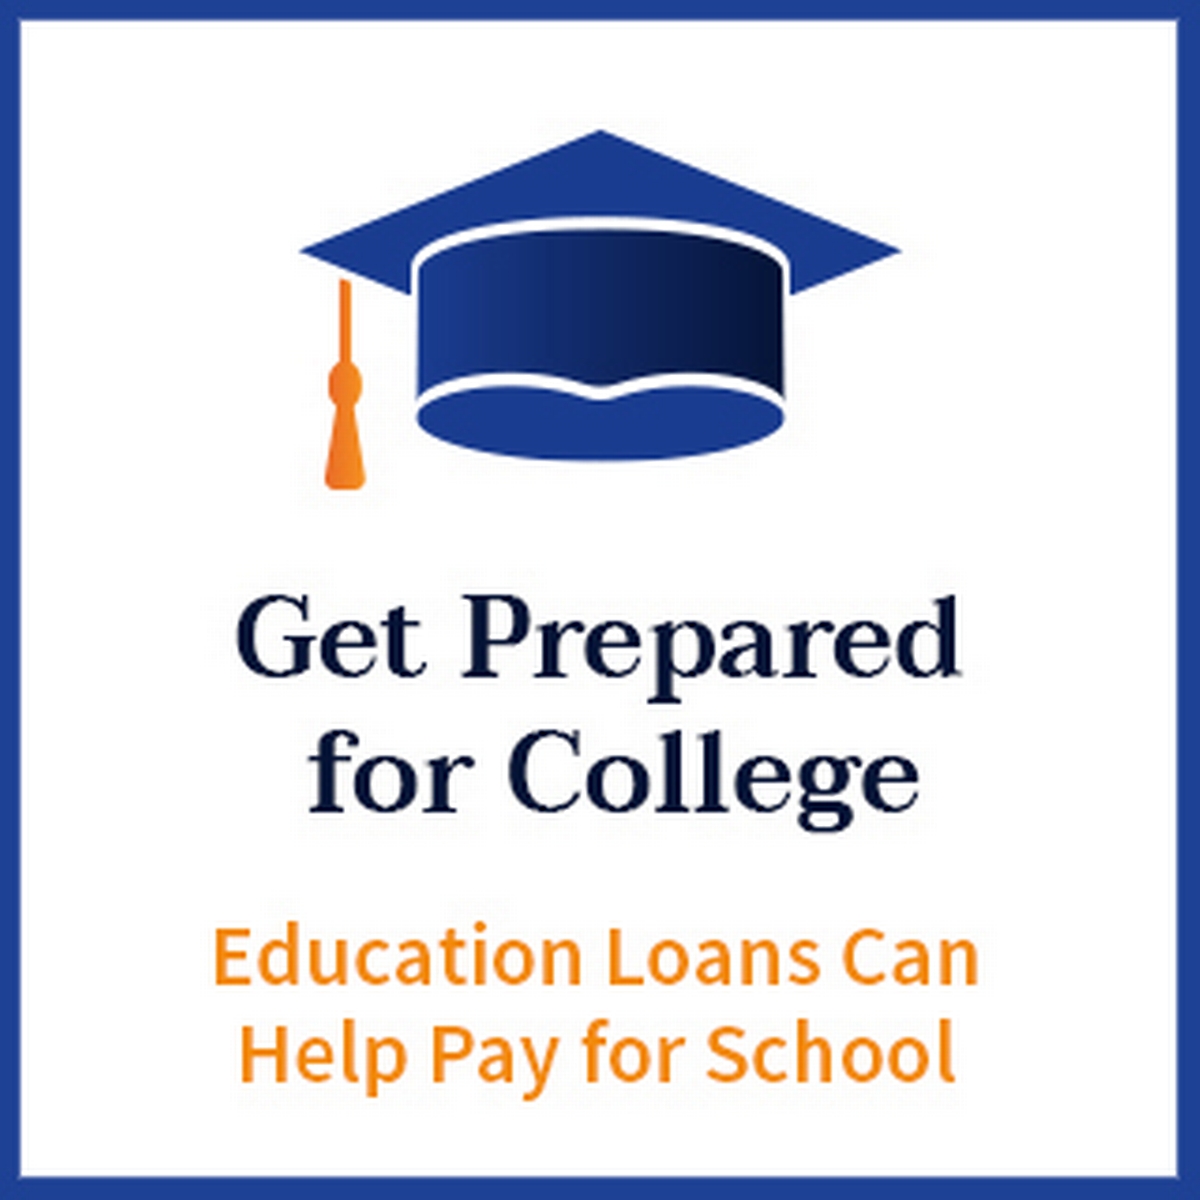 Get prepared for college! Education loans can help pay for school.